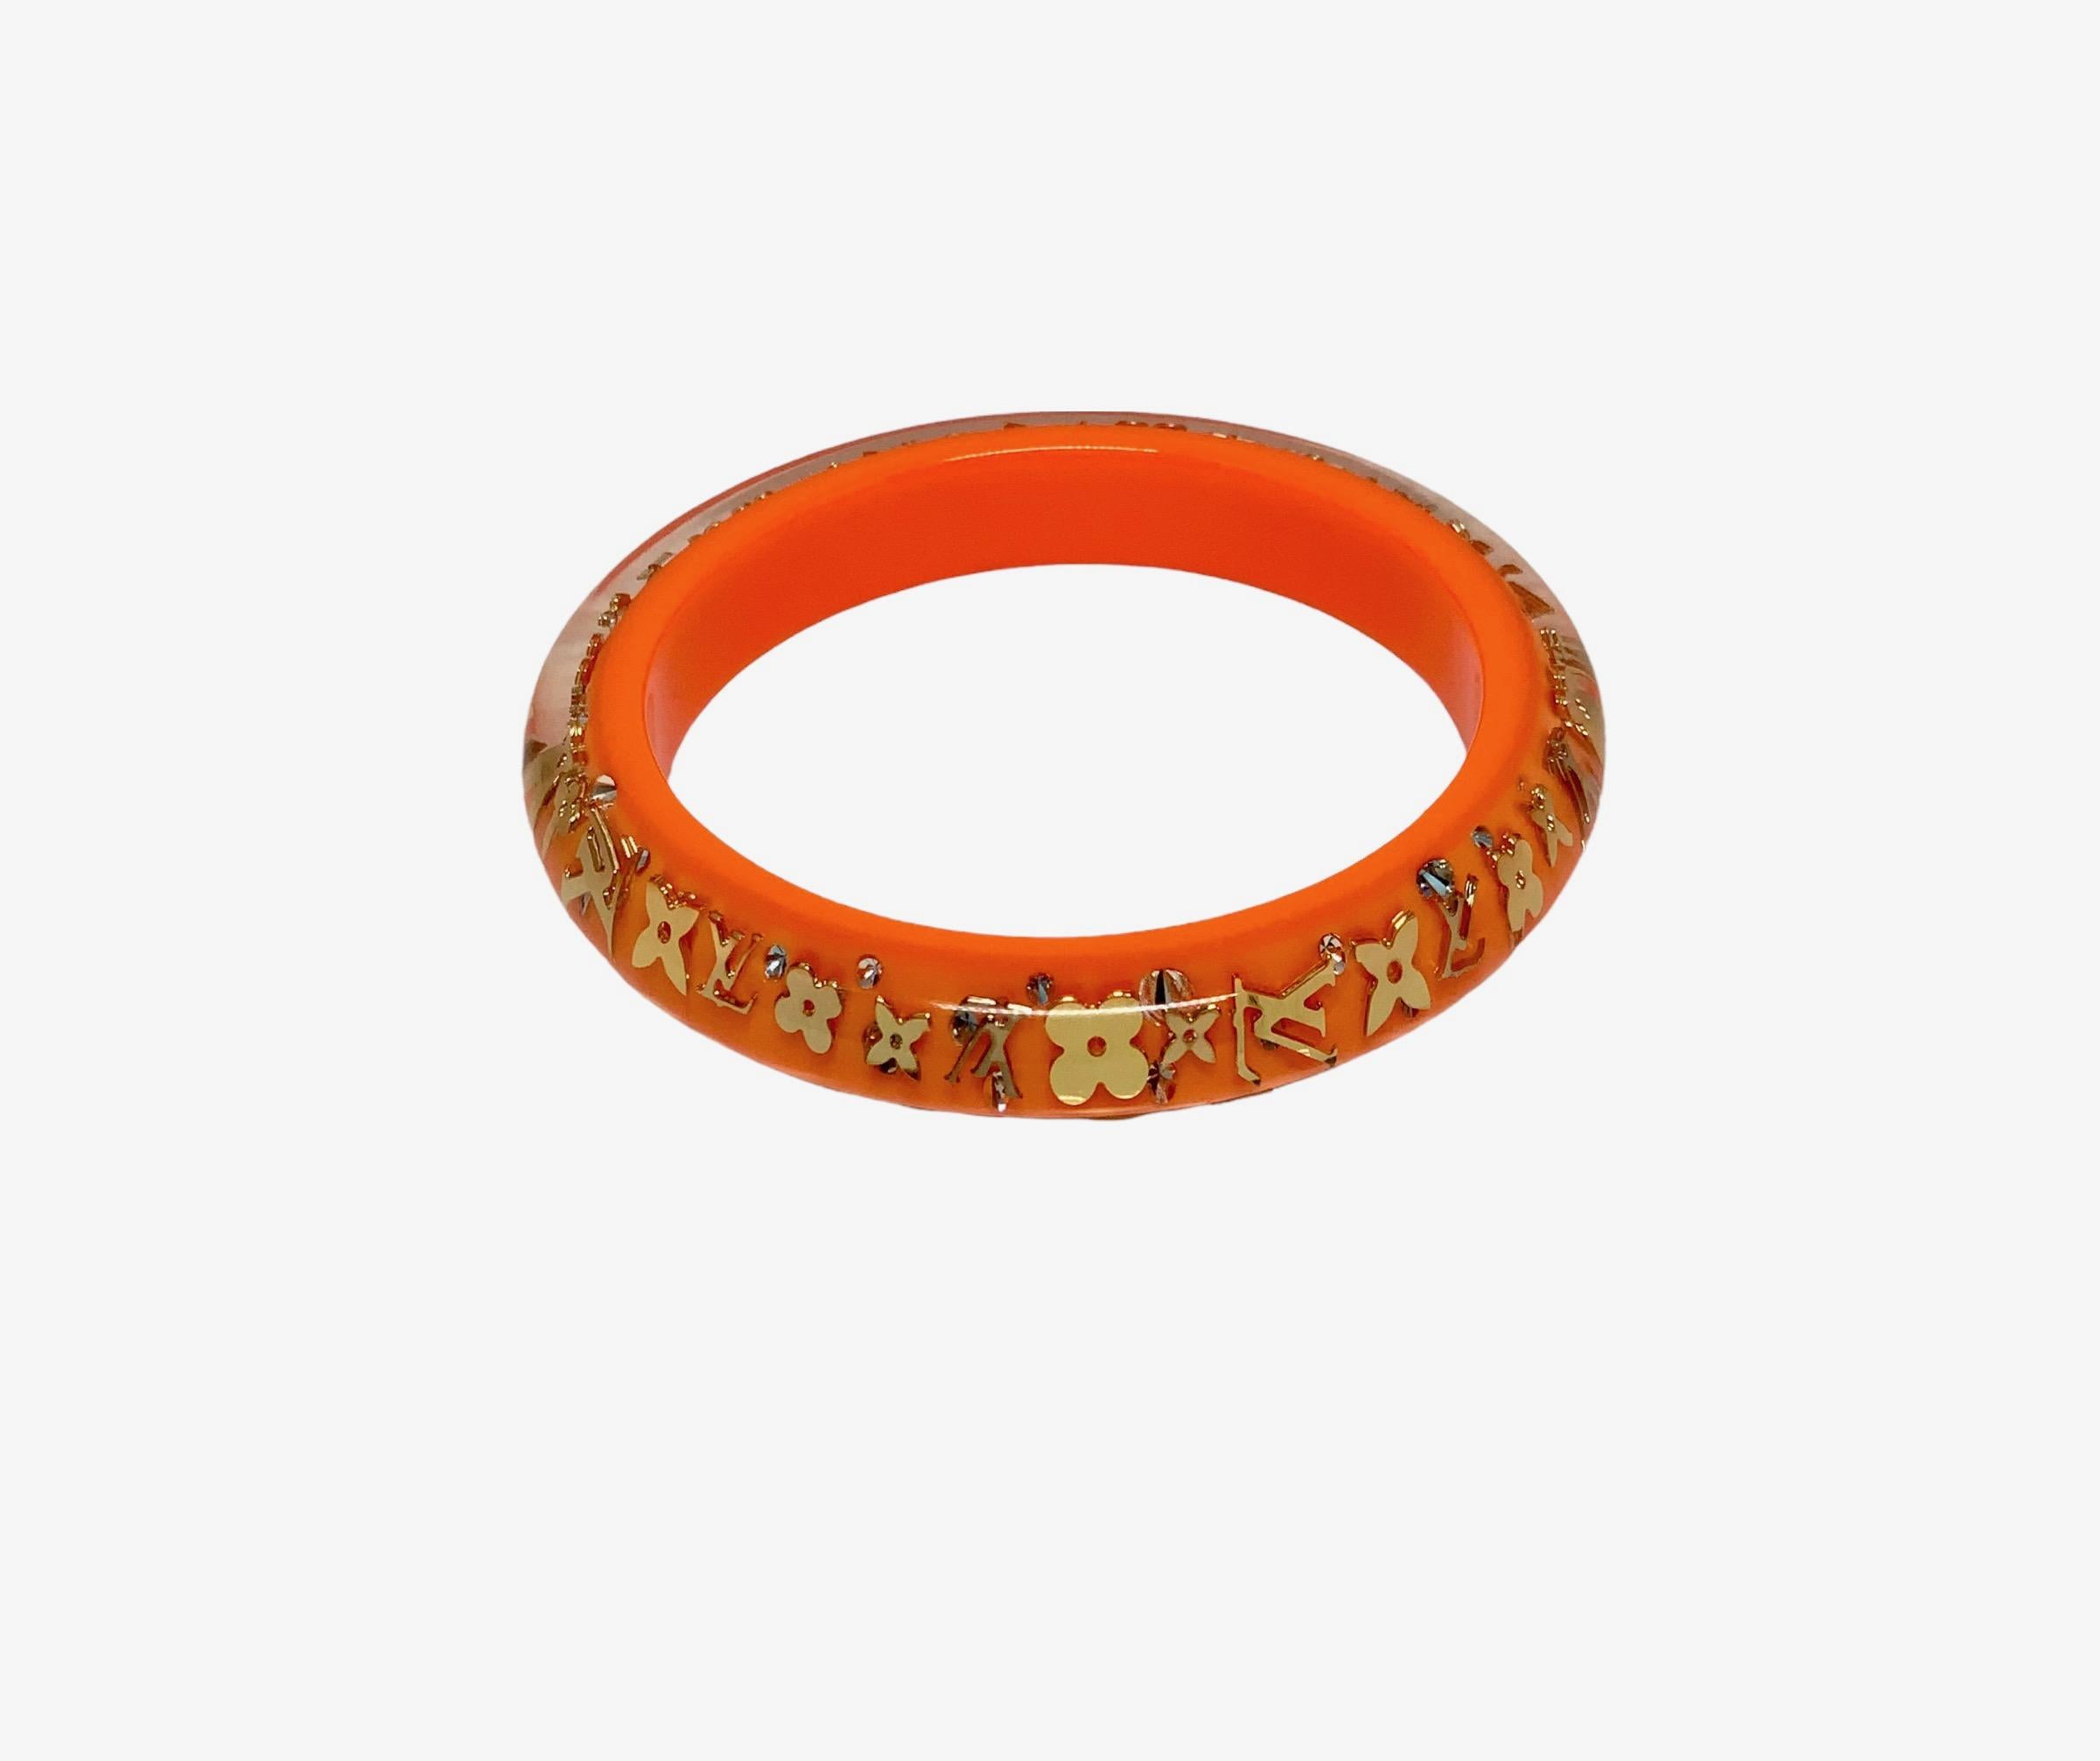 Very nice pre-owned bangle form the Inclusion Monogram collection from Louis Vuitton.
Crafted in a clear resin with orange, gold-tone LV monogram inclusion and rhinestones.

Collection: Inclusion Monogram
Color: Orange and goldtone 
Materials: